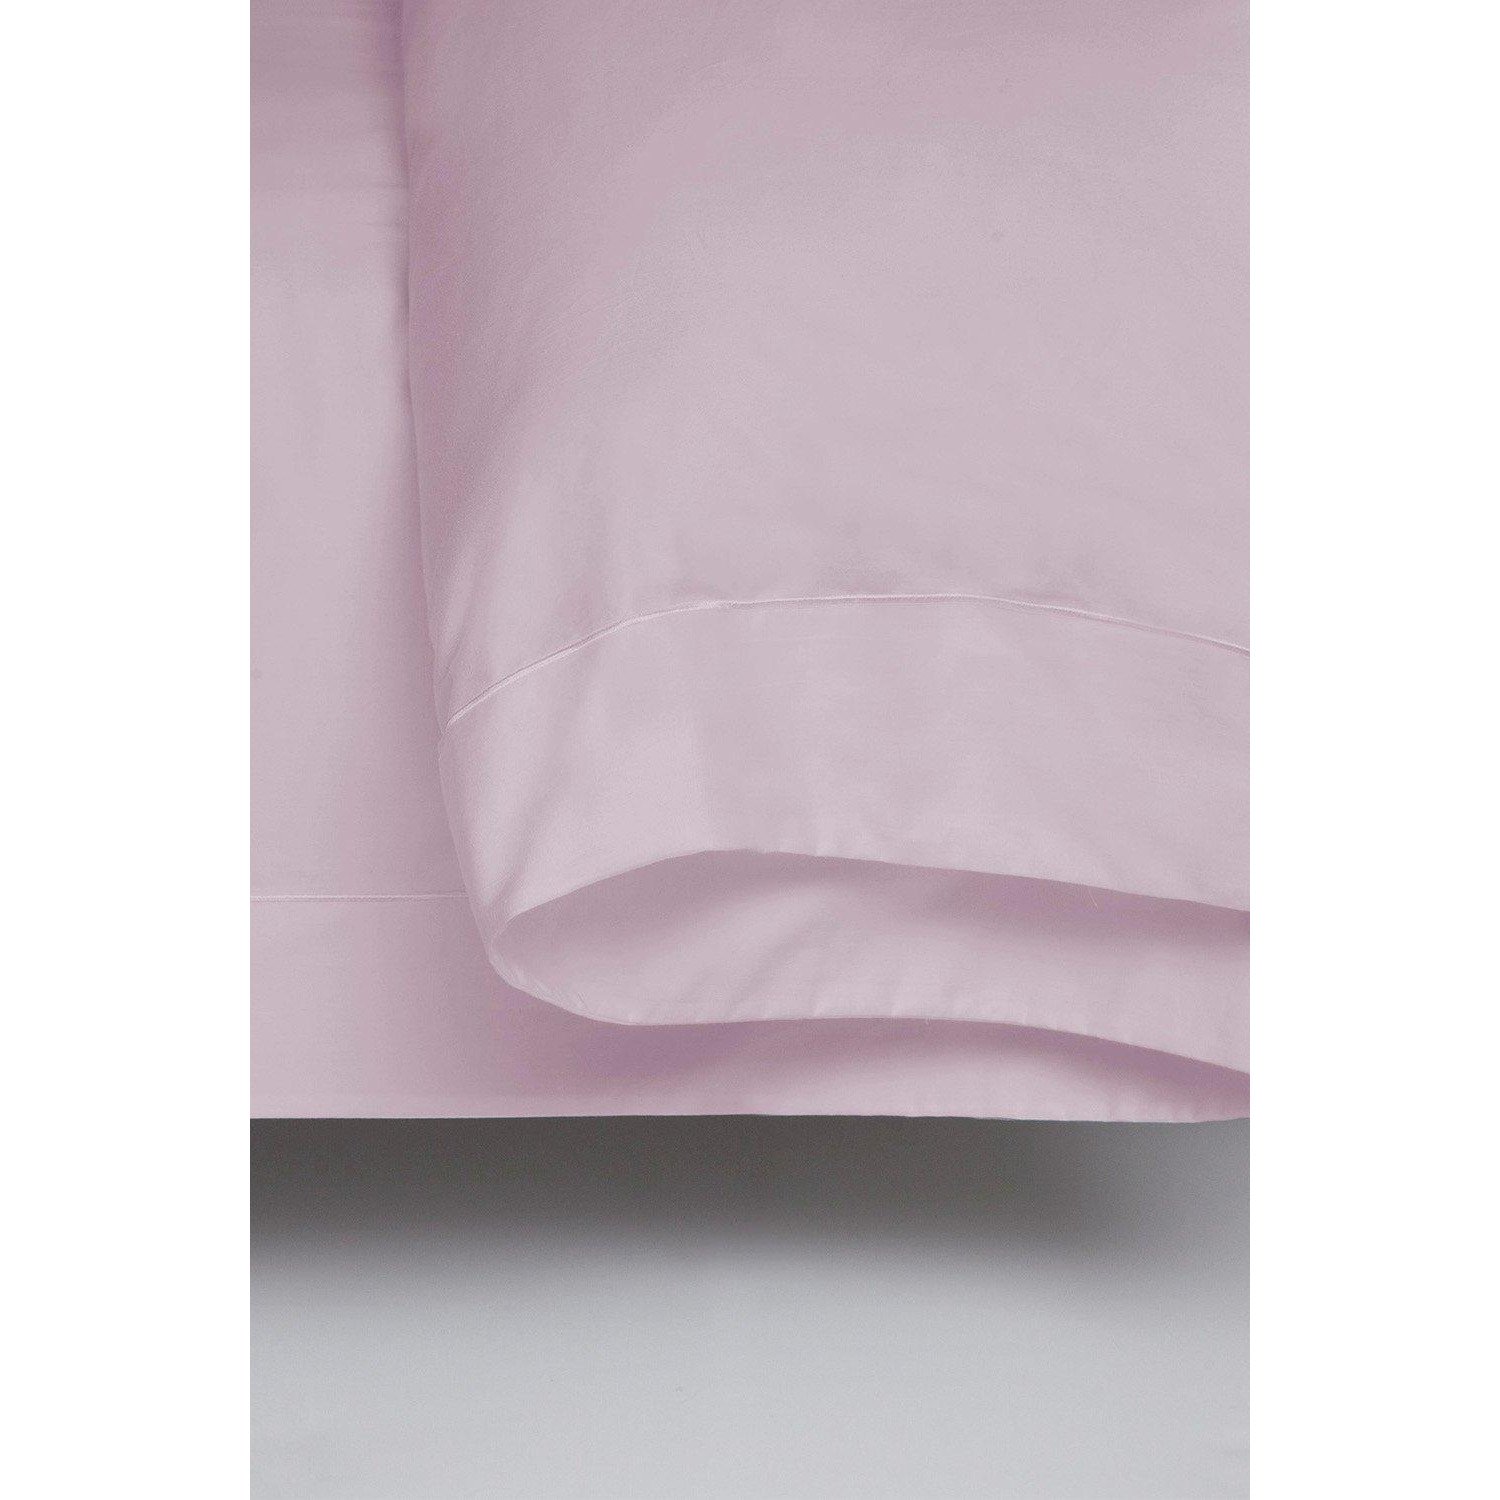 Egyptian Cotton 400 Thread Count Oxford Duvet Cover - image 1